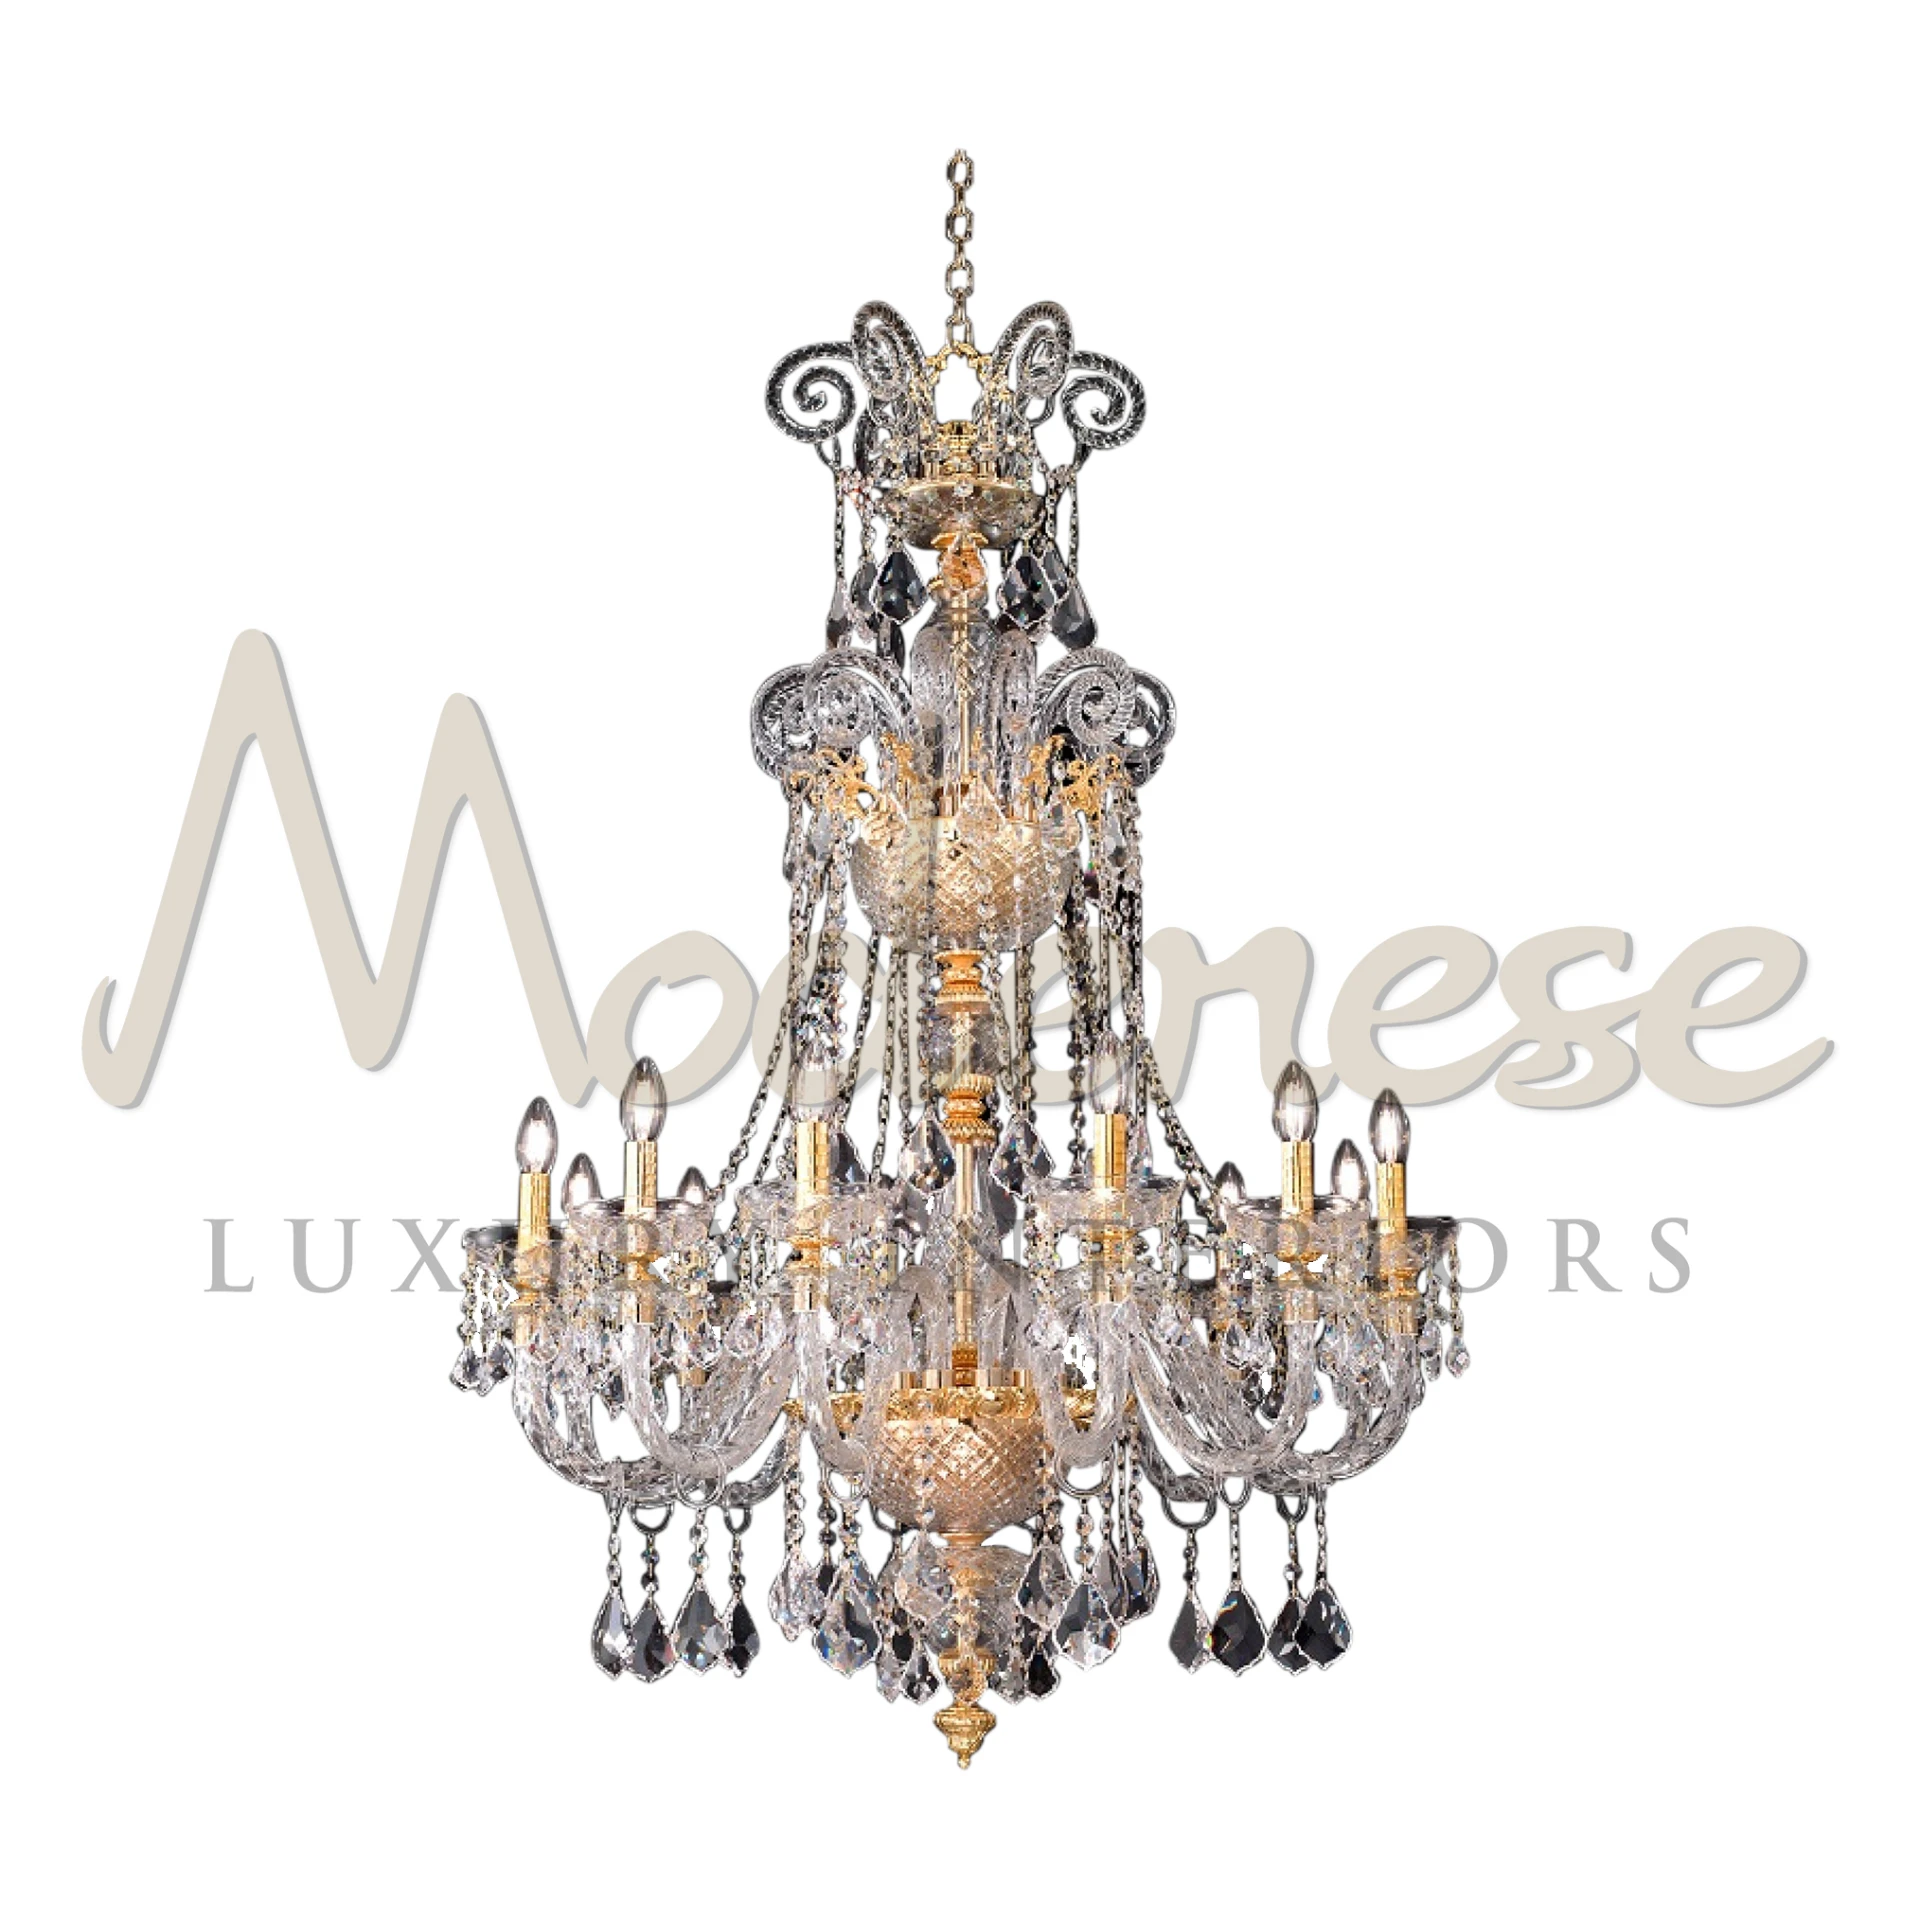 The 'Italian Grandeur Chandelier' with its opulent crystal drops and golden accents by Modenese